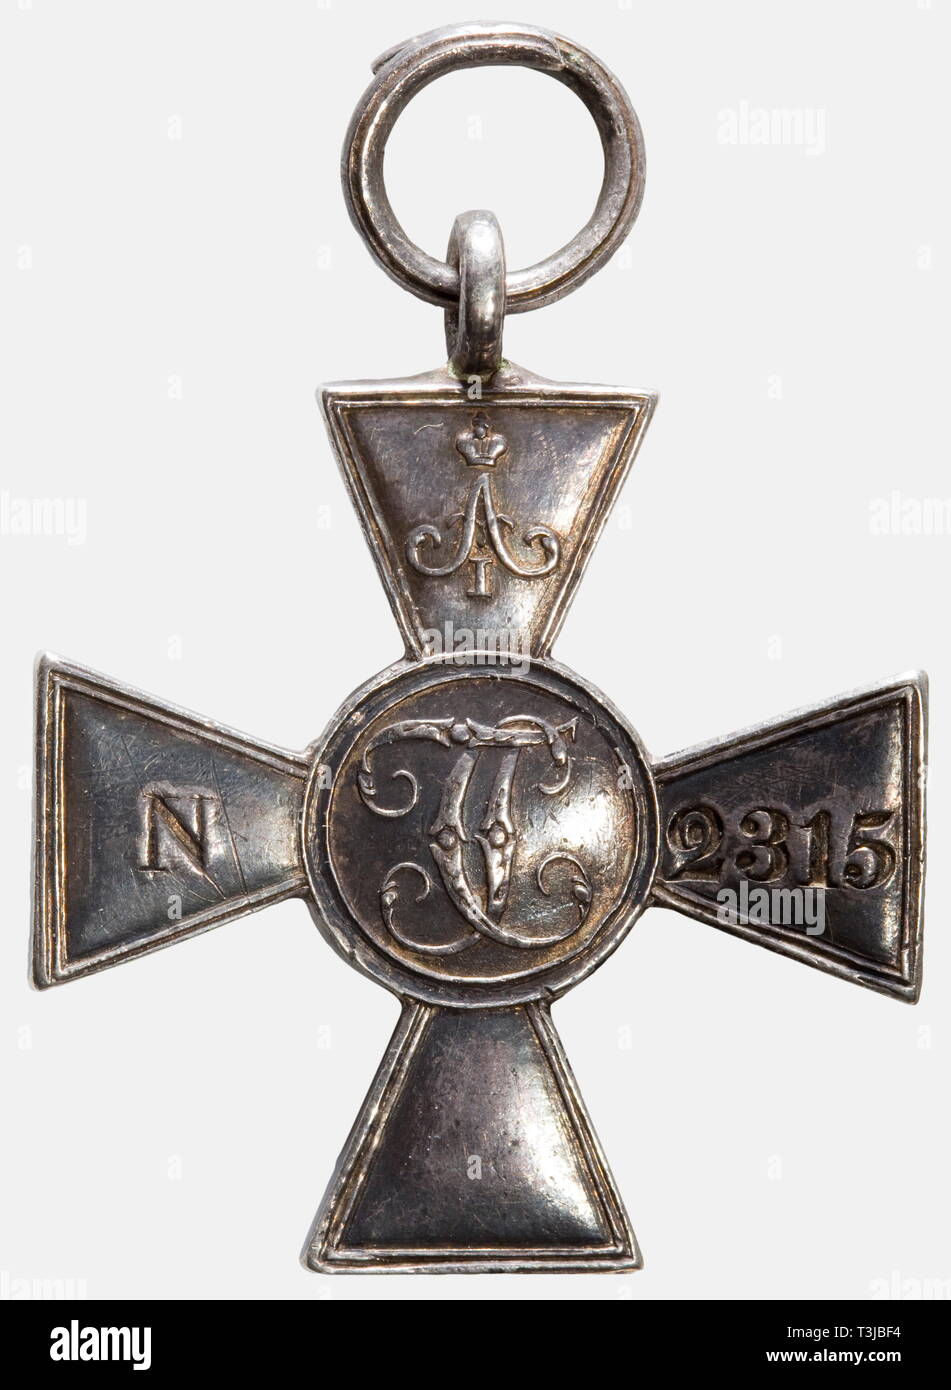 A Cross of St. George, for Prussian troops Russia, 1839. No class. Silver, the reverse with tsarist cipher 'A I' (for Alexander I) and stamped wearer number '2315'. The vertical eyelet altered at the time of use for wear on a medals clasp. Of the 4,500 pieces manufactured, 4,264 were actually awarded. Very rare. historic, historical, 19th century, medal, decoration, medals, decorations, badge of honour, badge of honor, badges of honour, badges of honor, object, objects, stills, clipping, clippings, cut out, cut-out, cut-outs, Additional-Rights-Clearance-Info-Not-Available Stock Photo